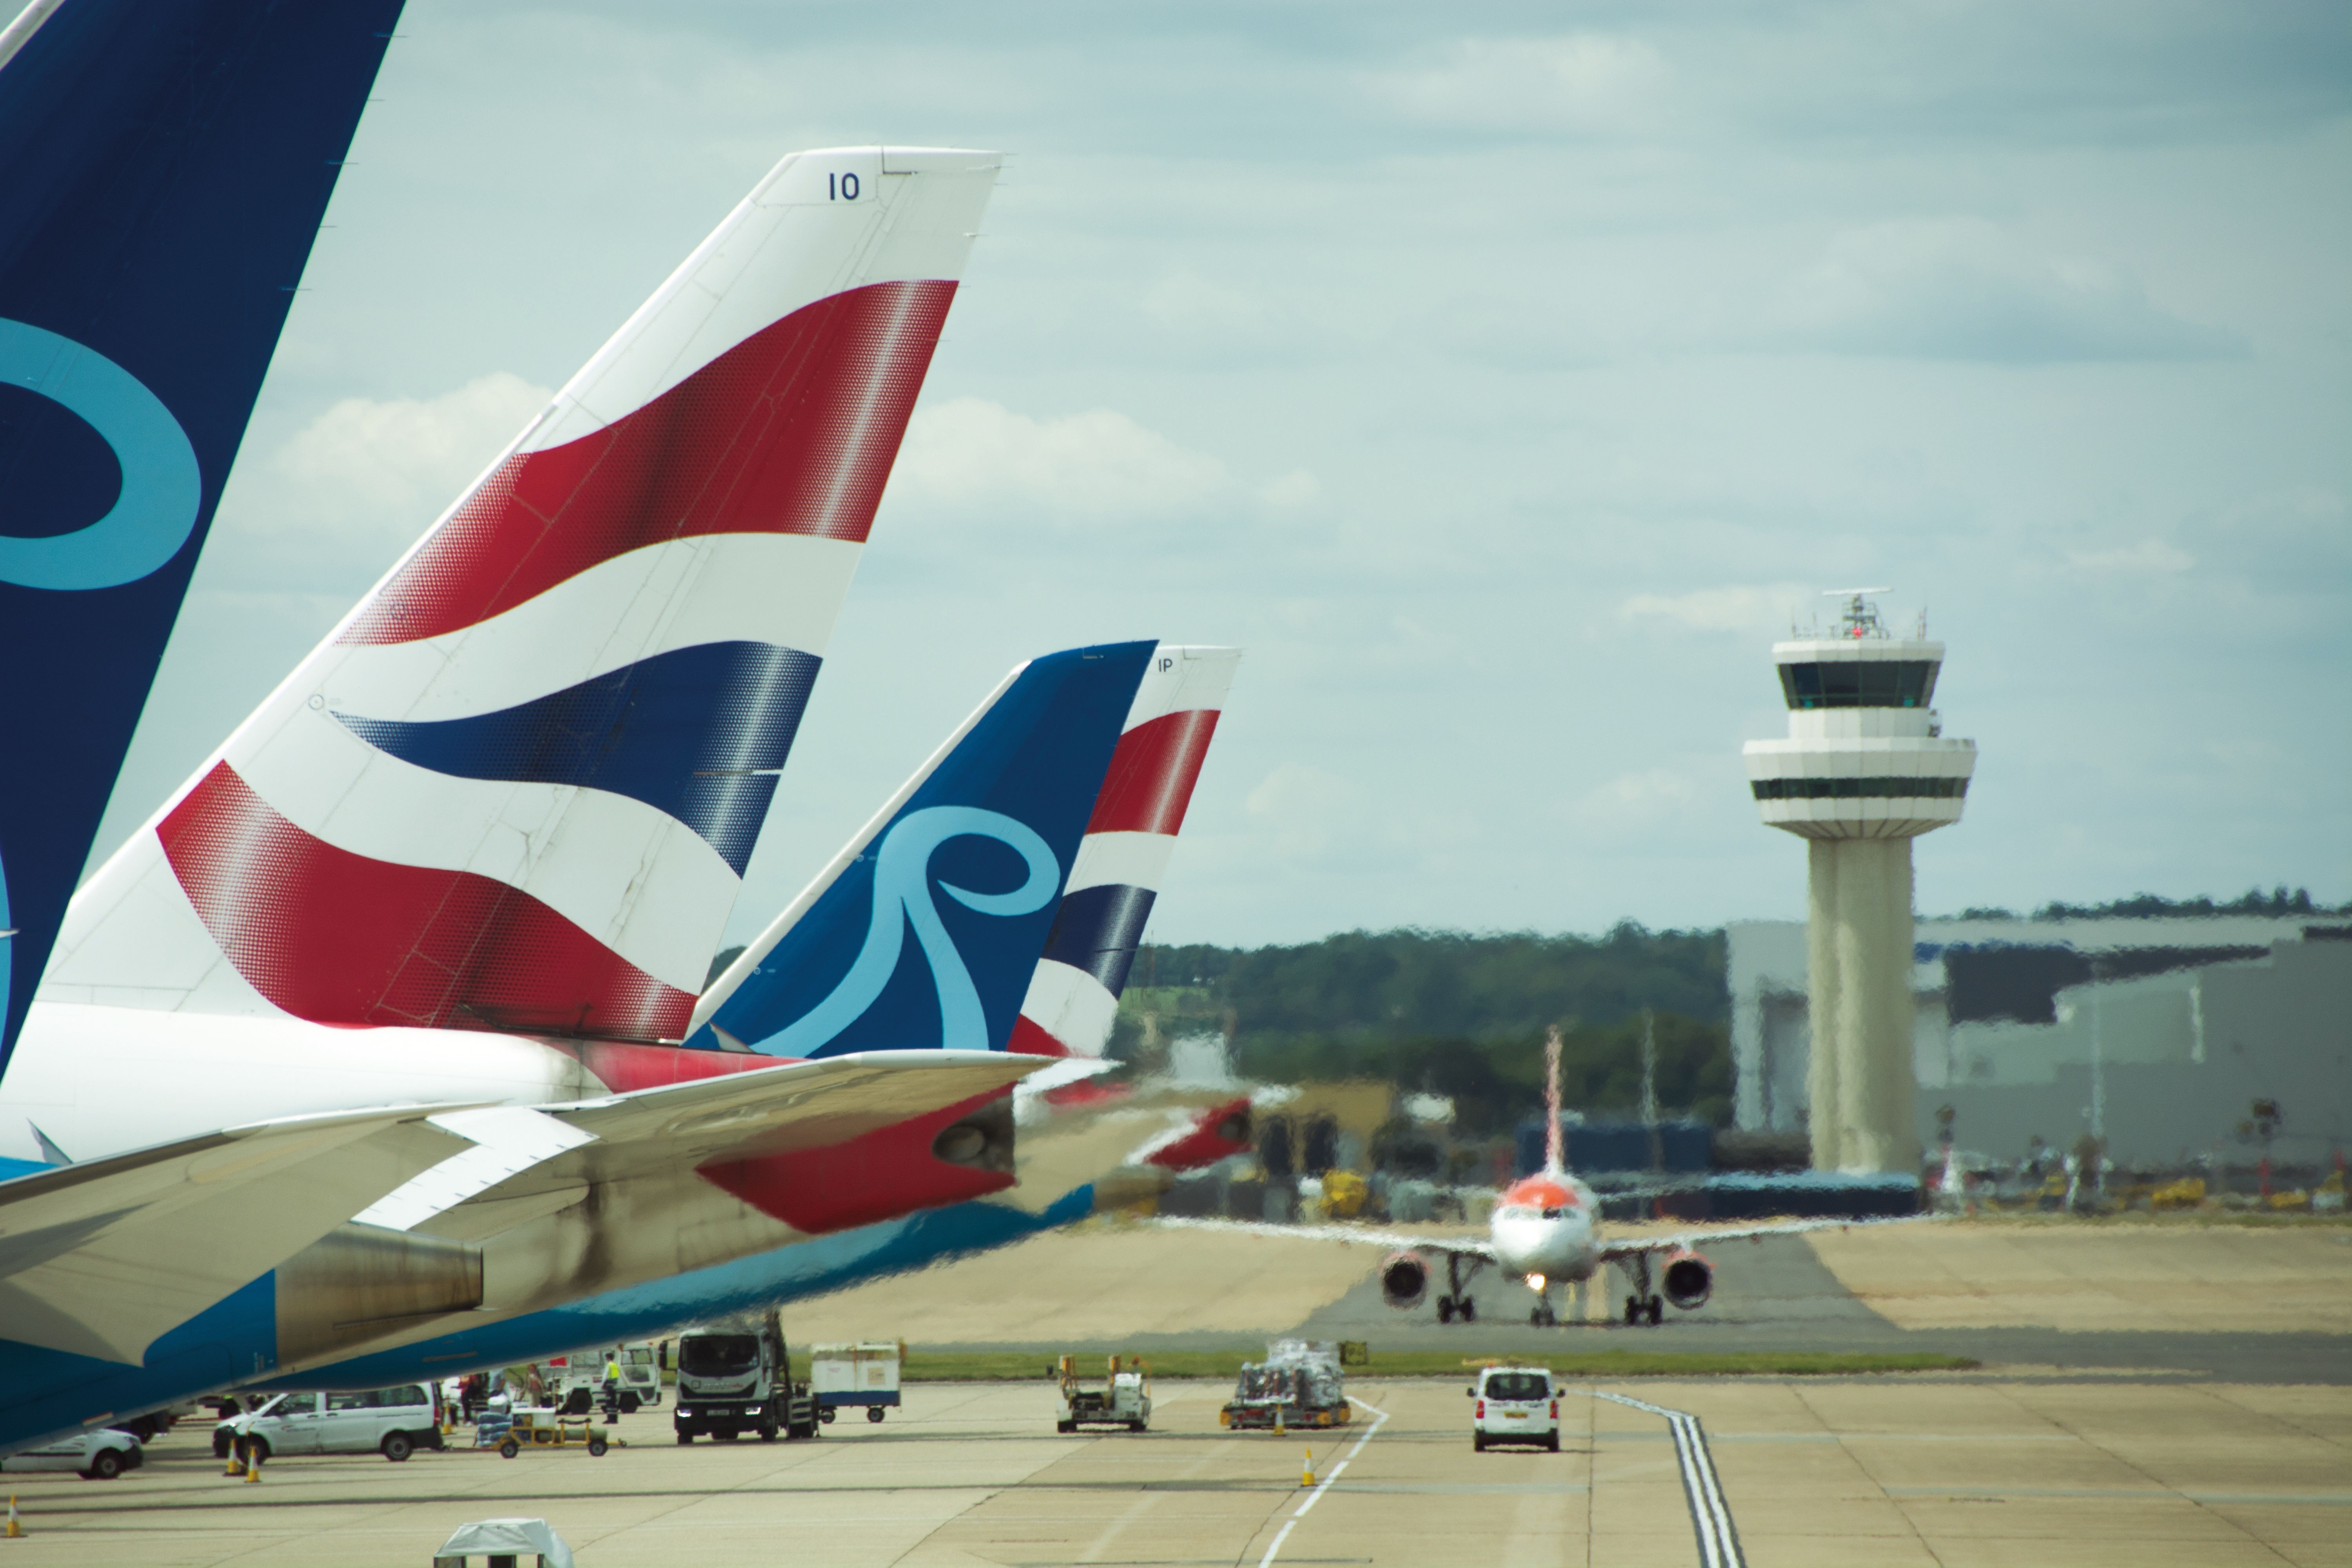 The tails of several British Airways and Norse Atlantic aircraft parked on an airport apron.